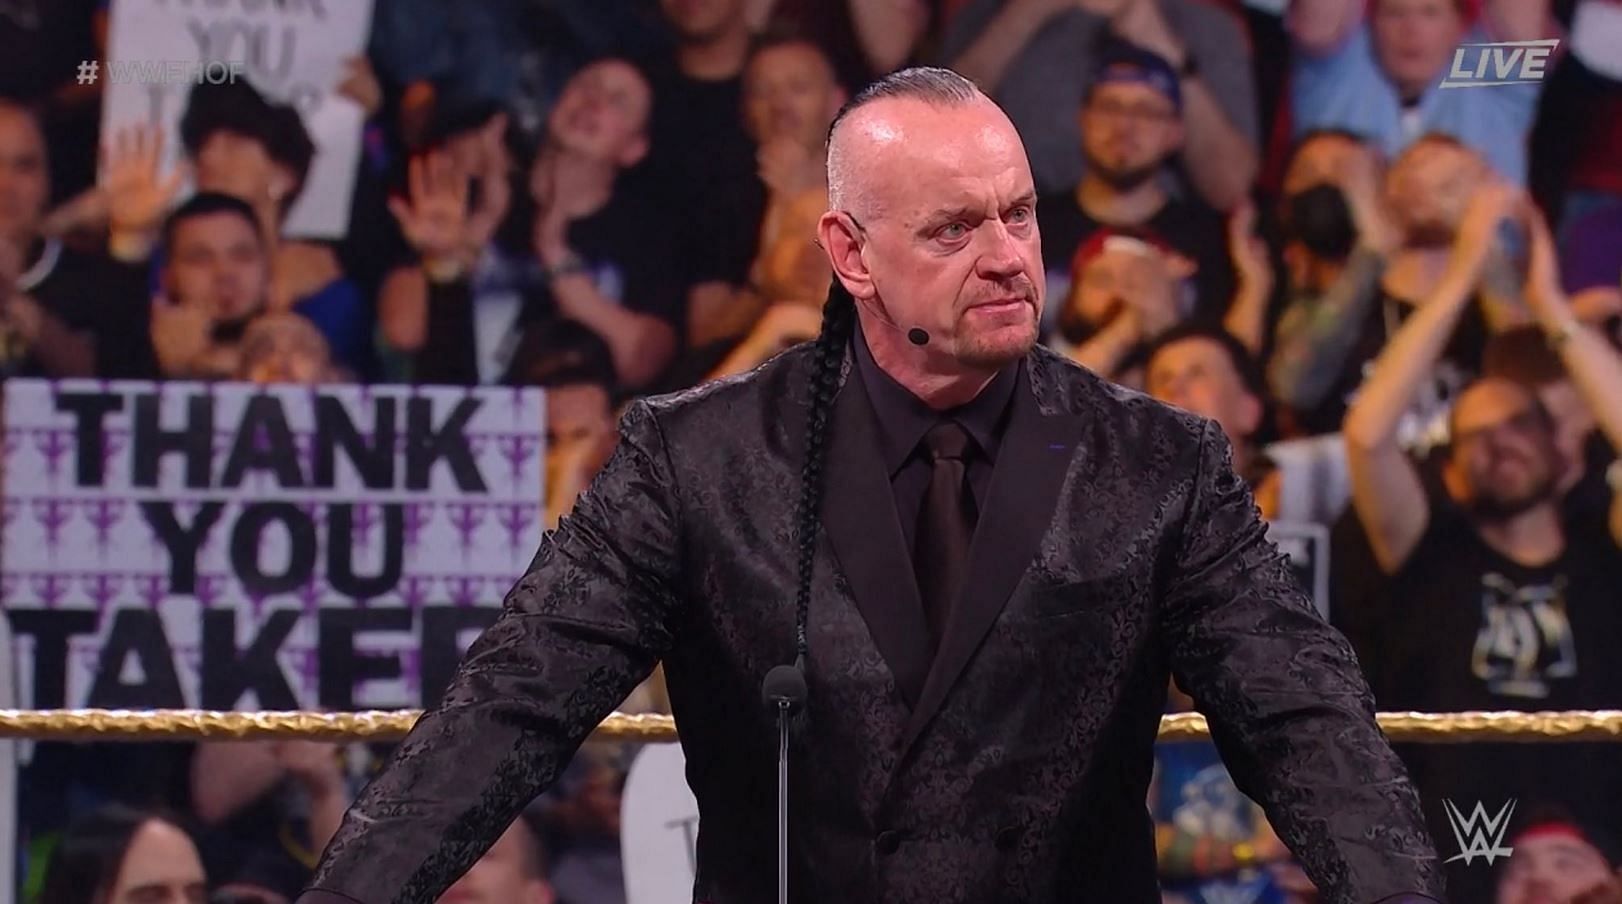 Teddy Long was absent from The Undertaker